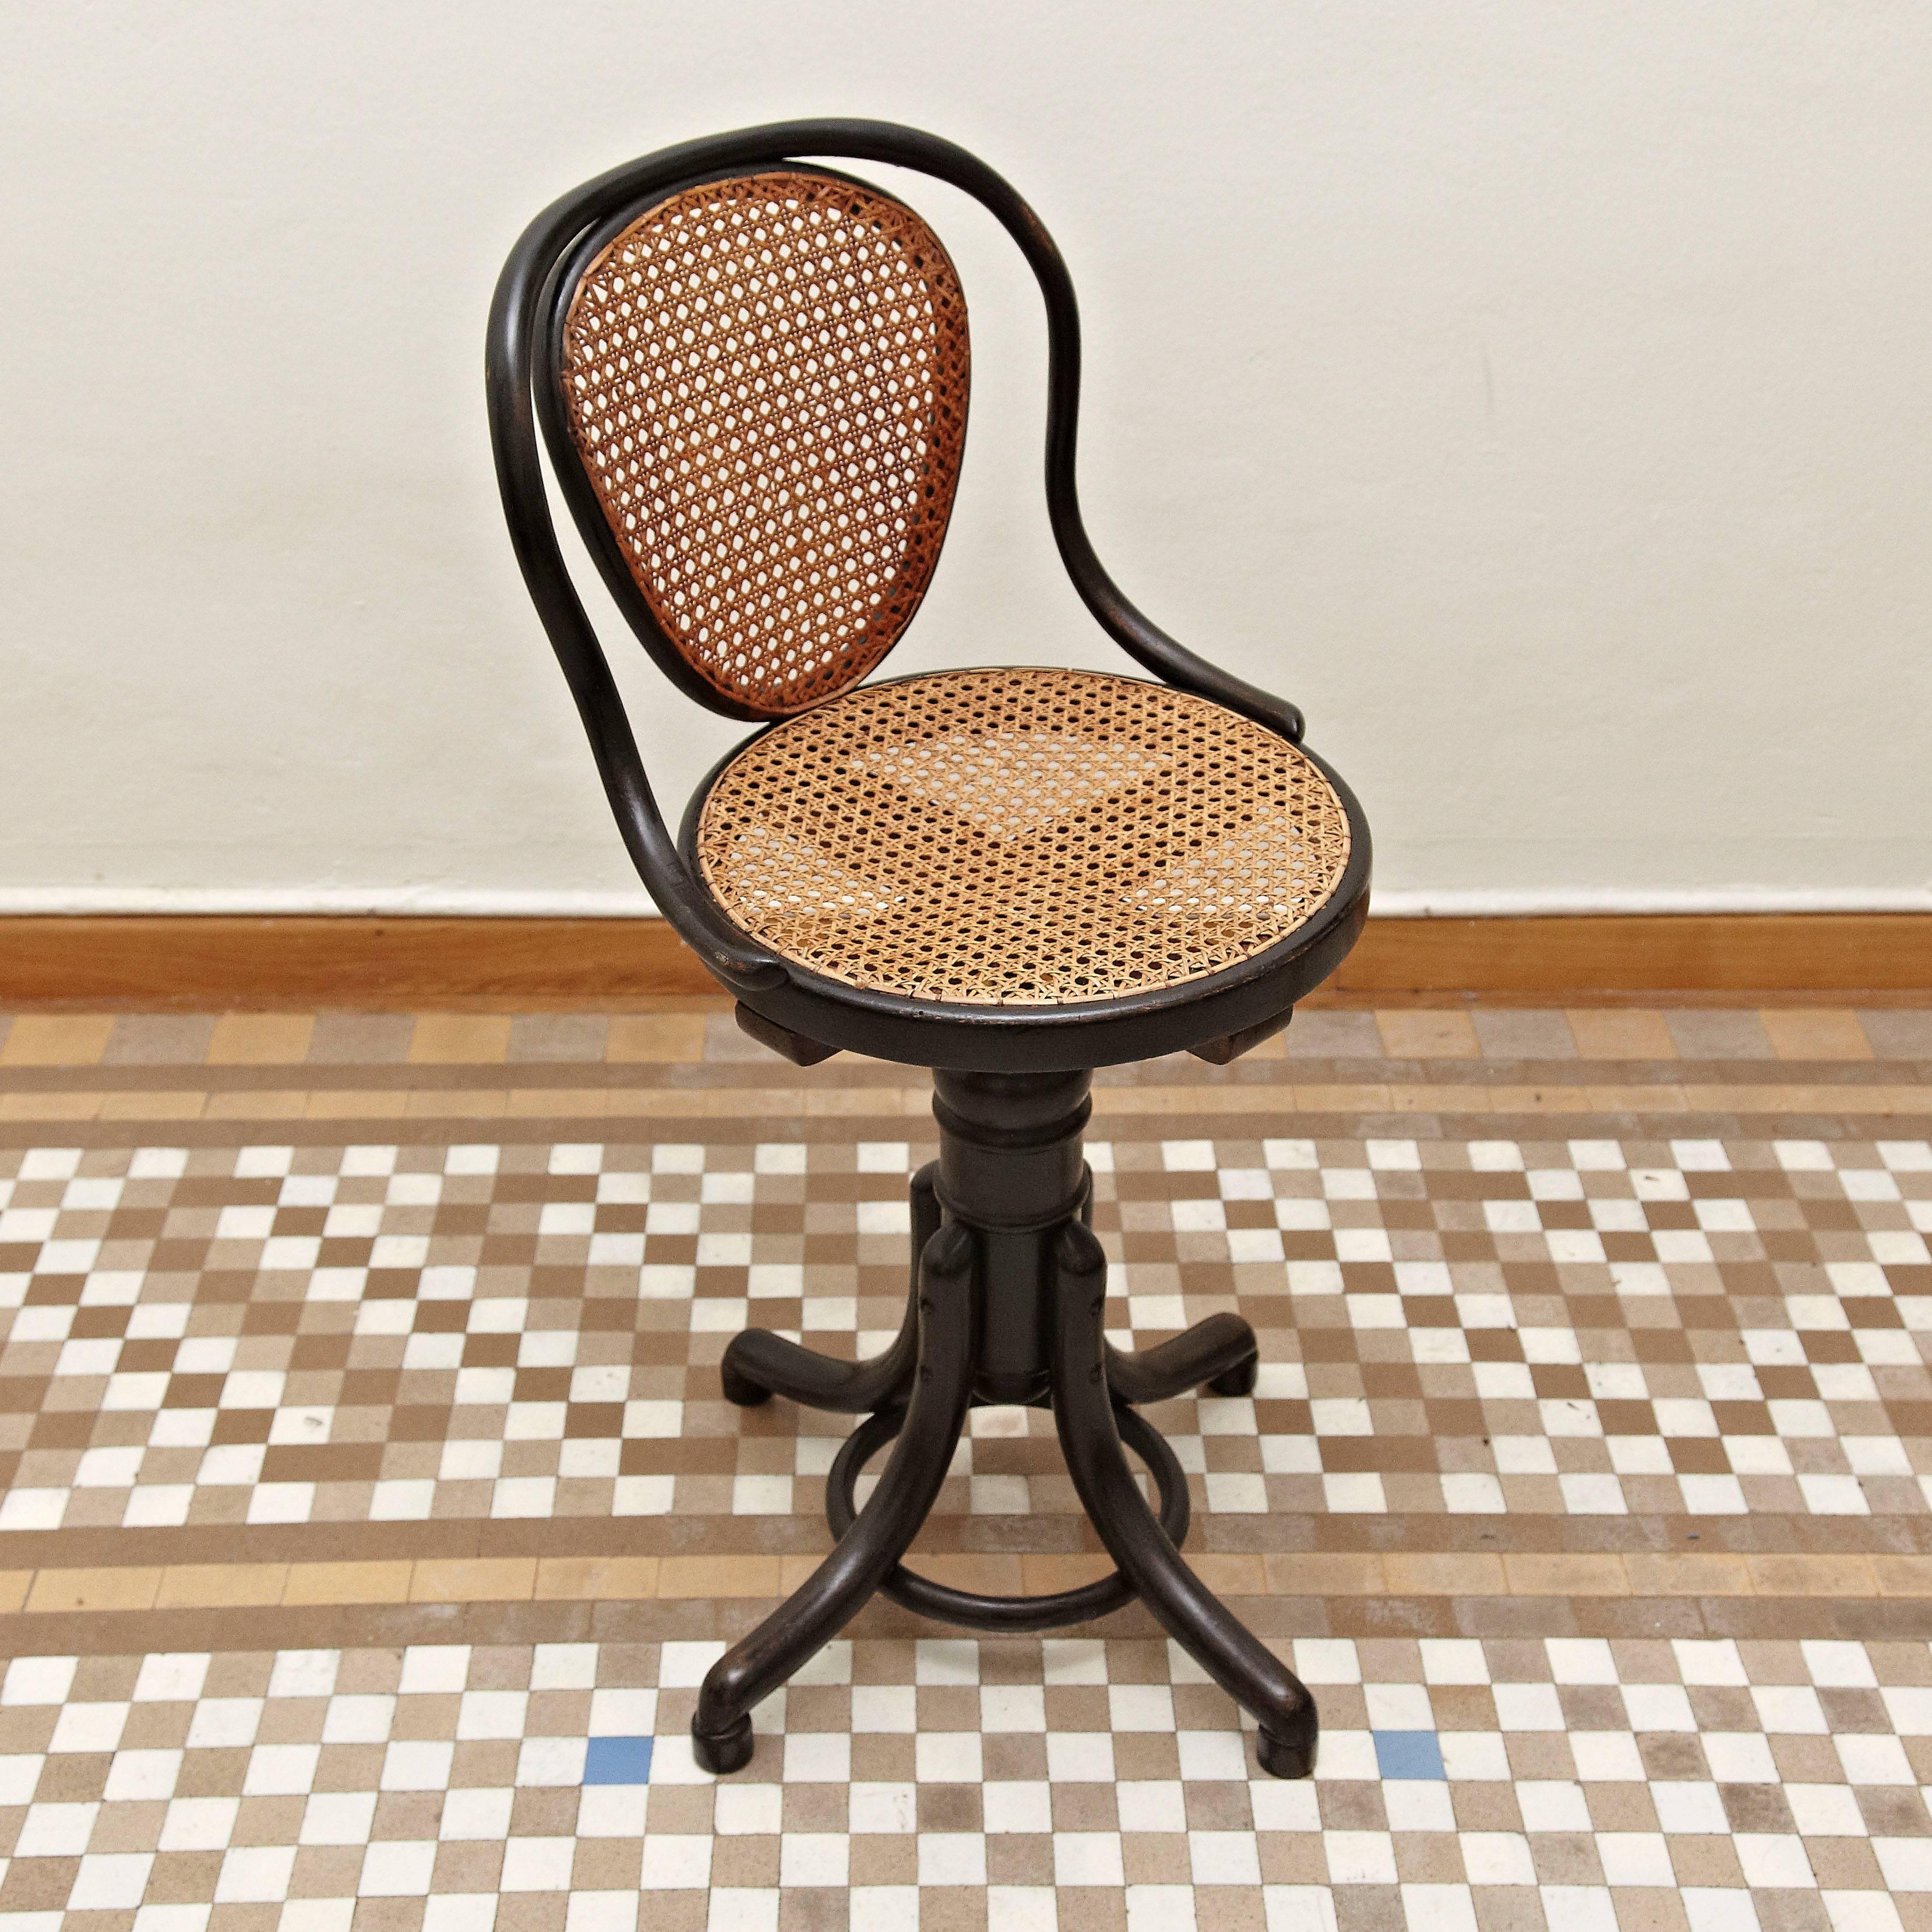 Other Thonet Number 1 by Auguste Thonet for Thonet, circa 1900